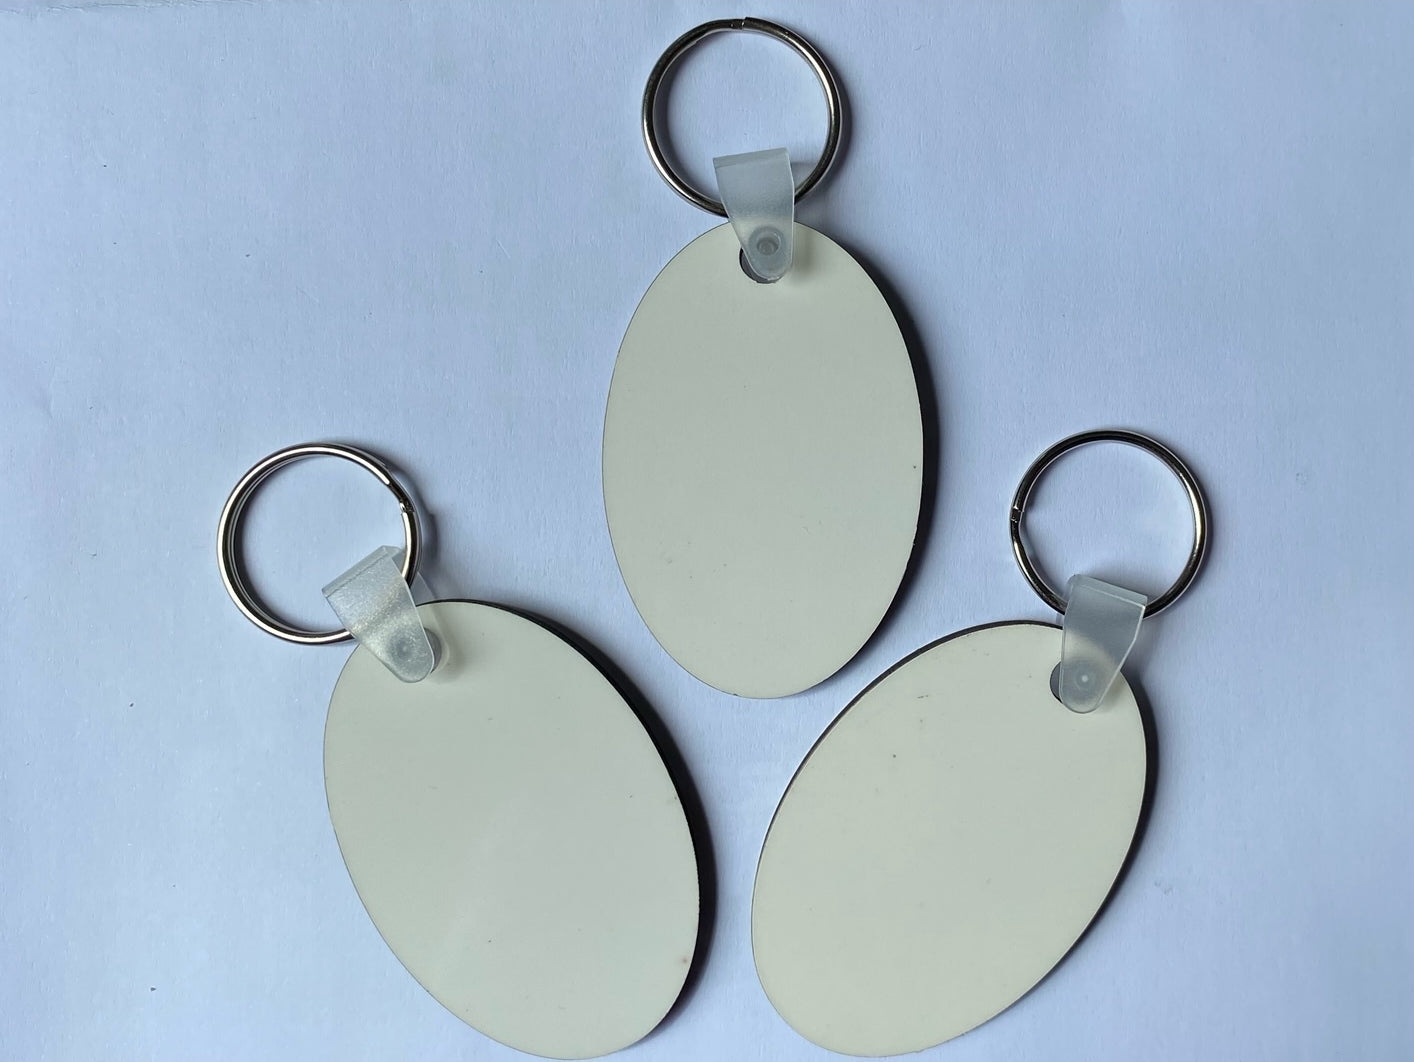  Blank Sublimation MDF Keyrings 6cm x 4cm Double Sided Oval